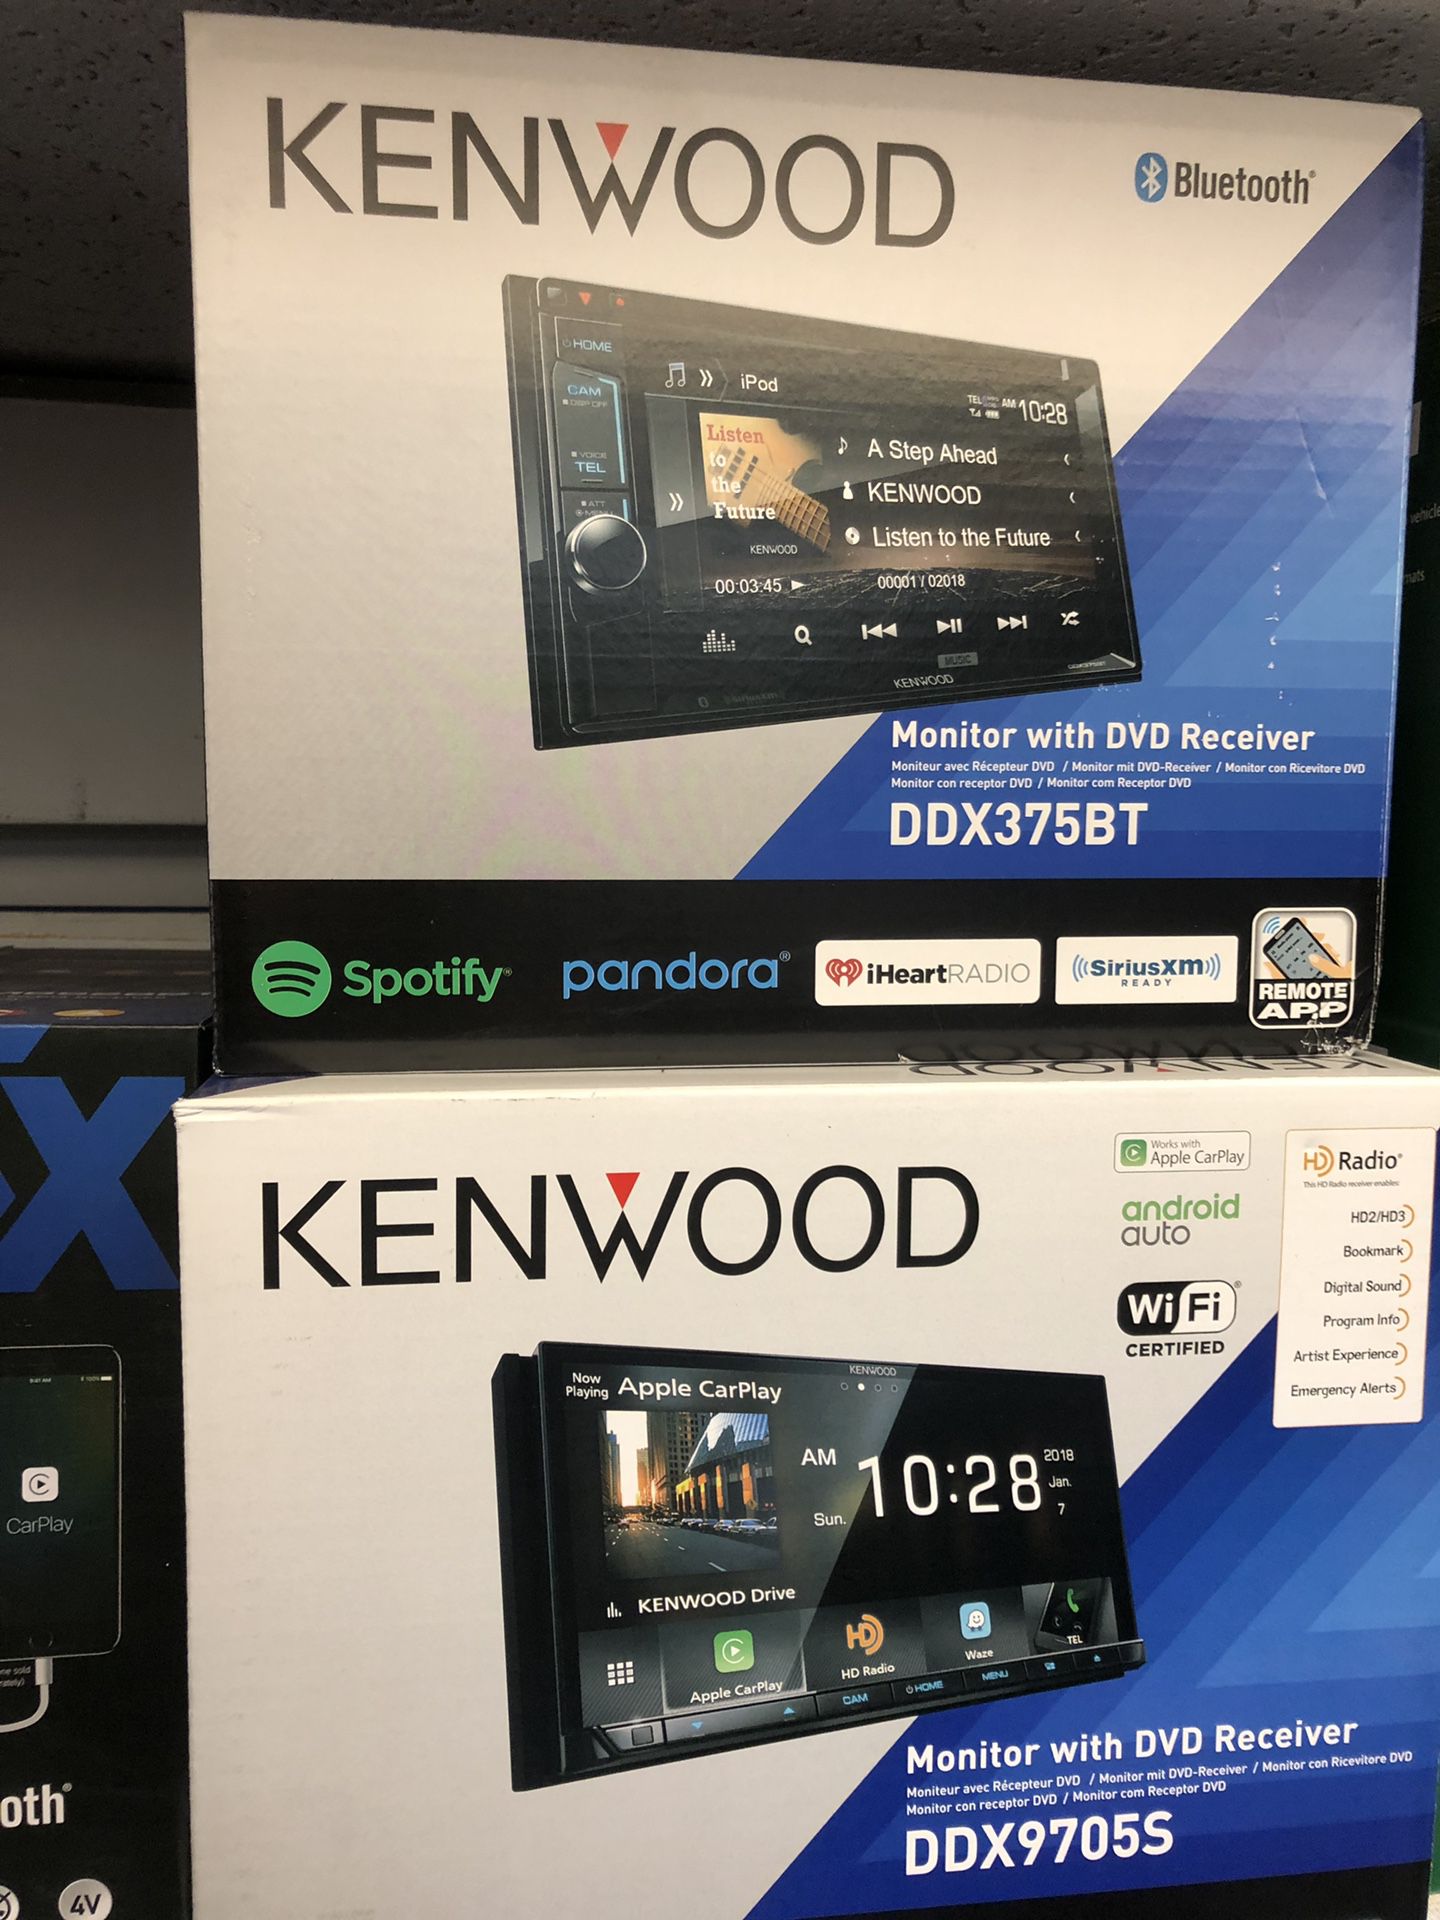 KENWOOD DDX9705s 7” car Apple paly android auto stereo Bluetooth touchscreen system YouTube Wi-Fi